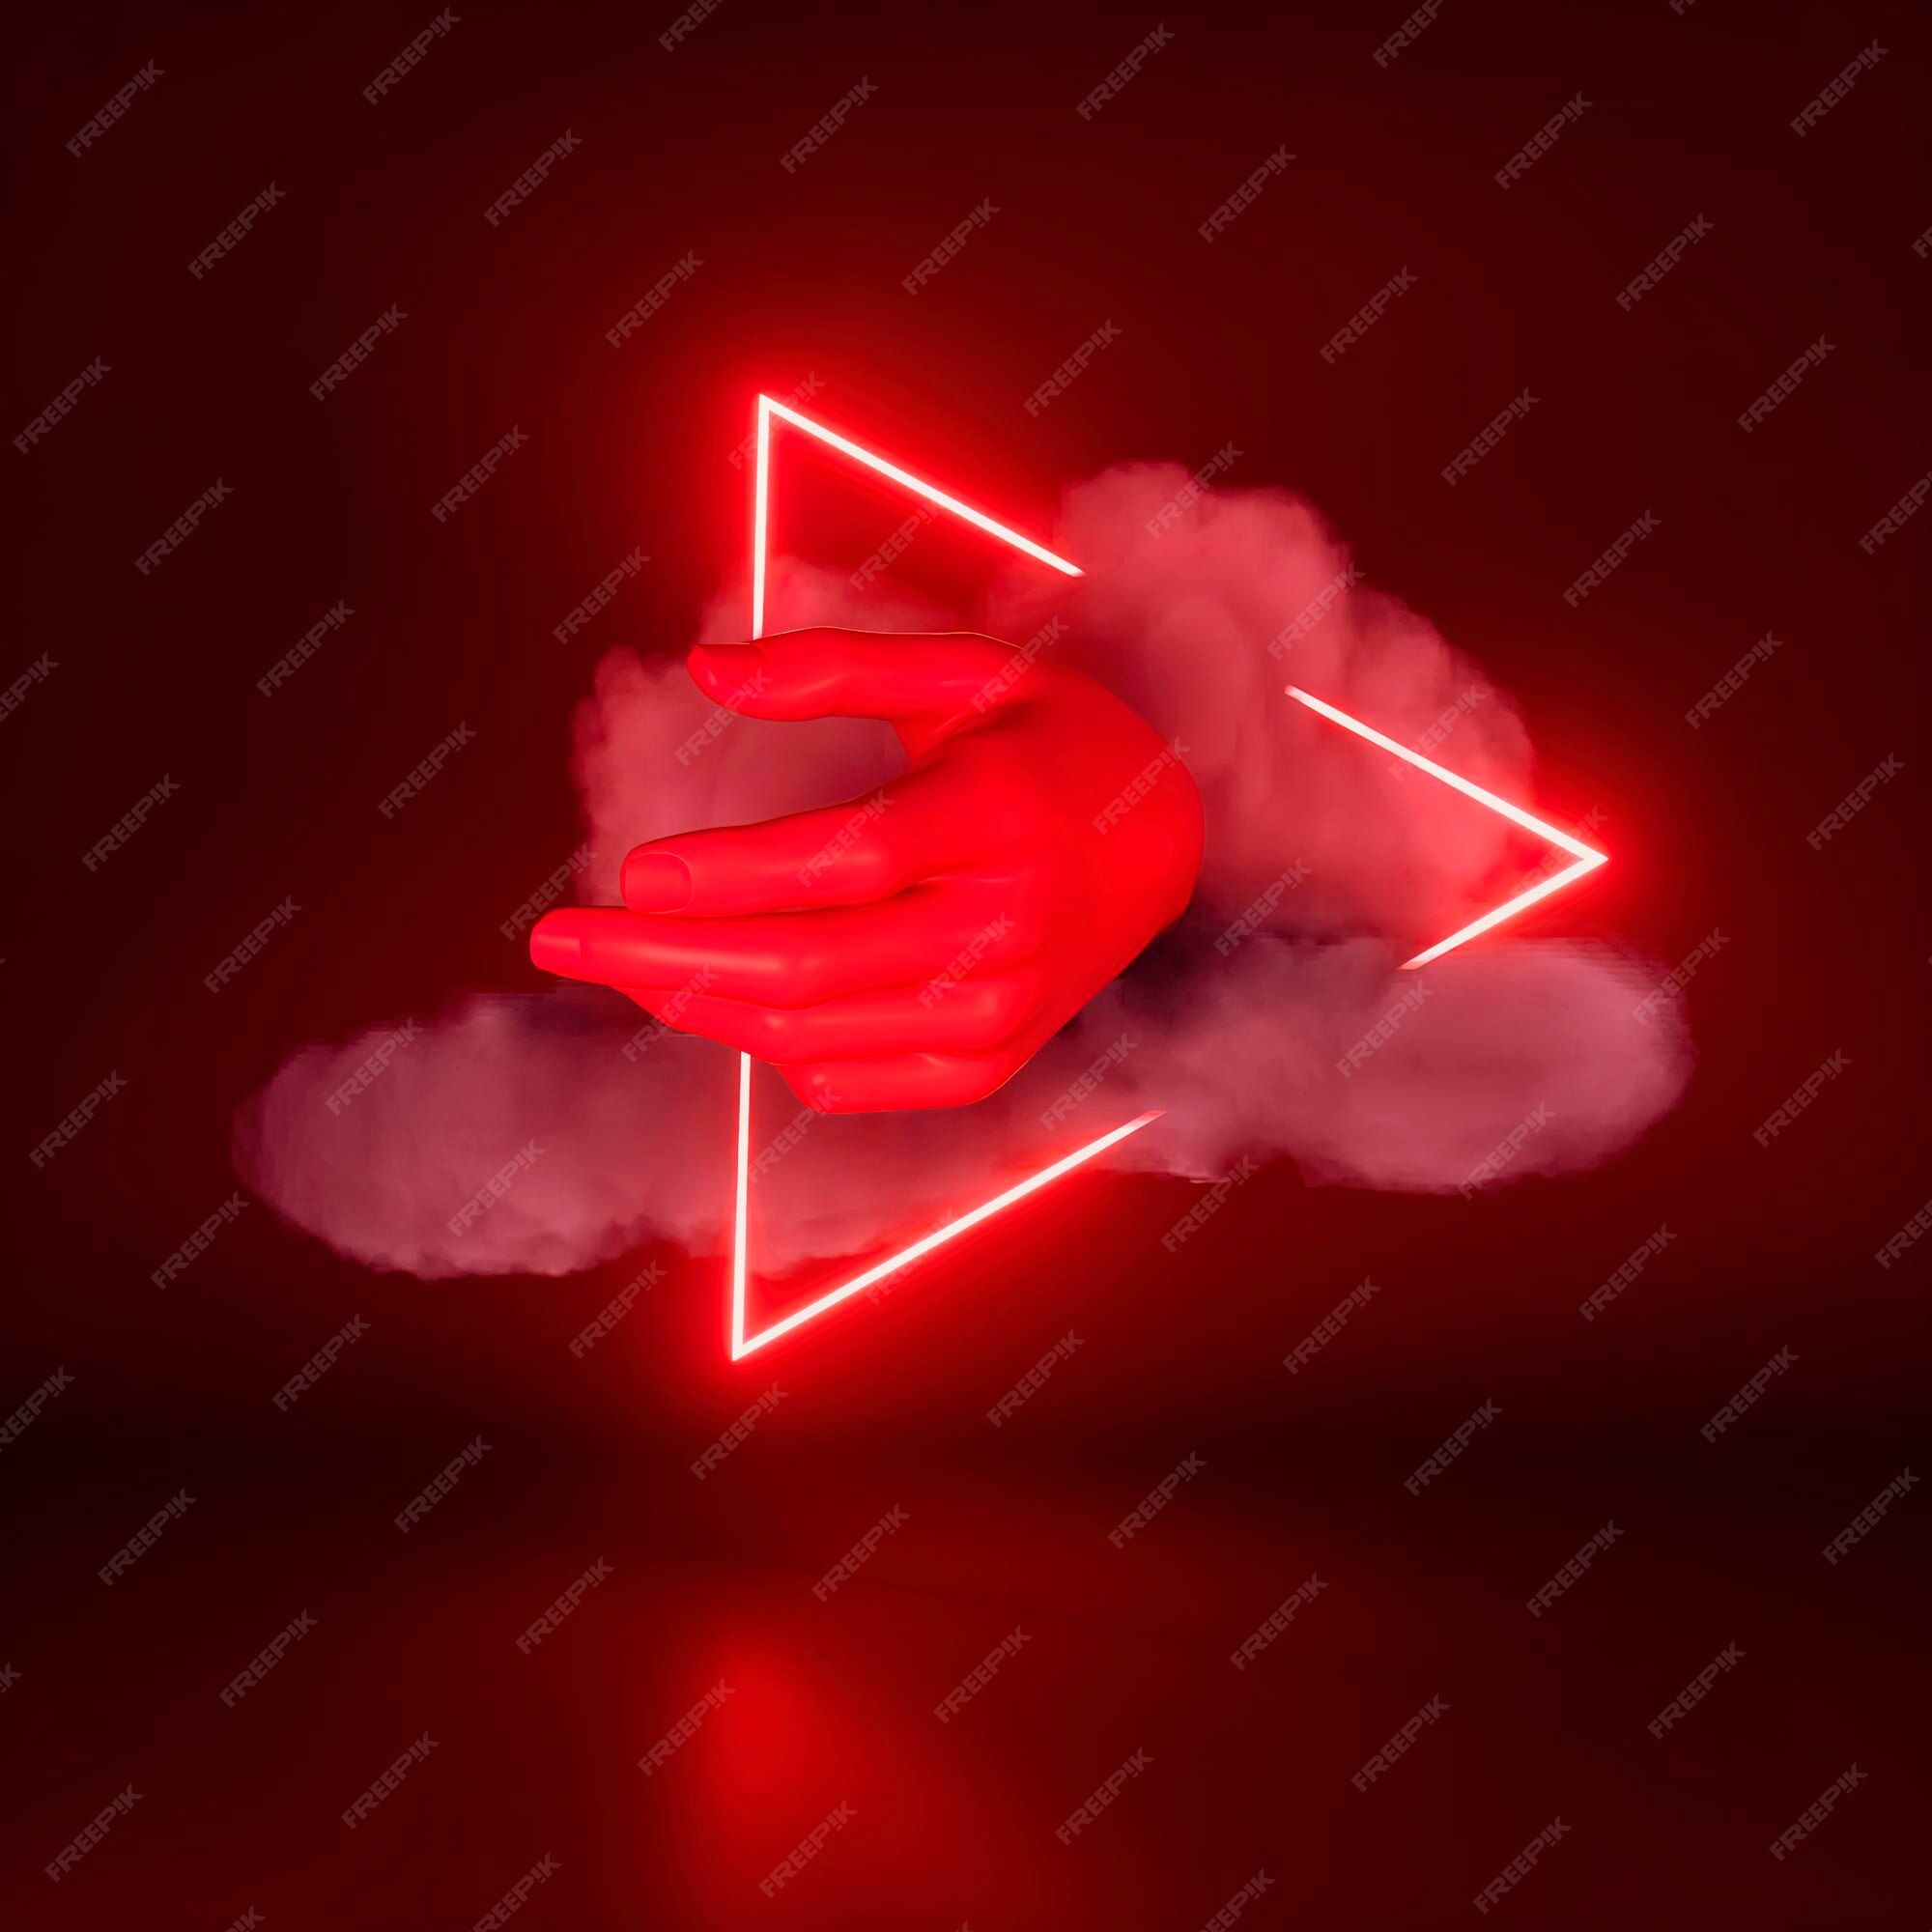 Red neon triangle and cloud with a pink hand - Neon red